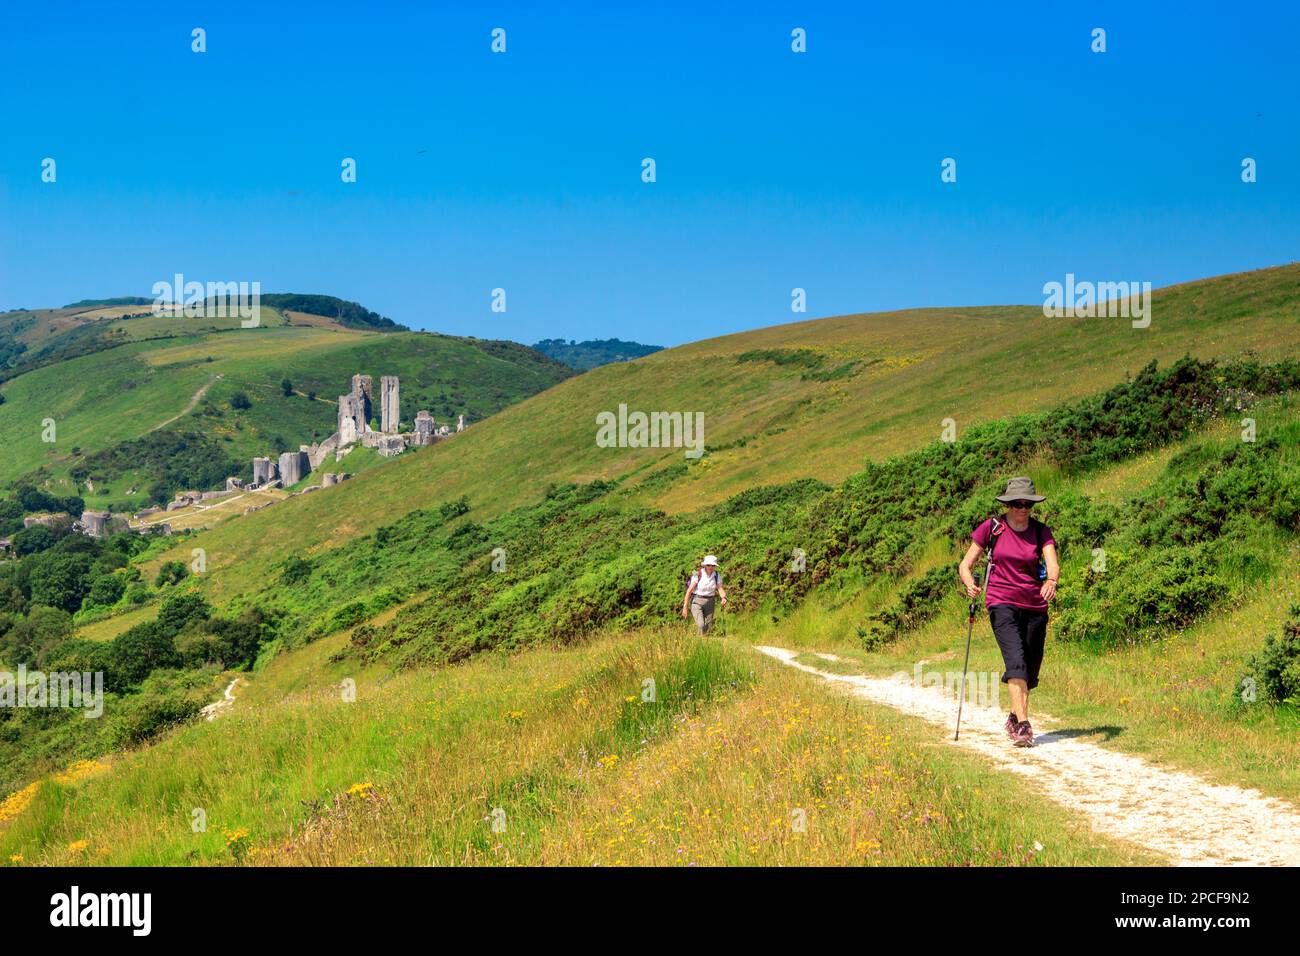 A healthy walk in beautiful downland countryside Stock Photo